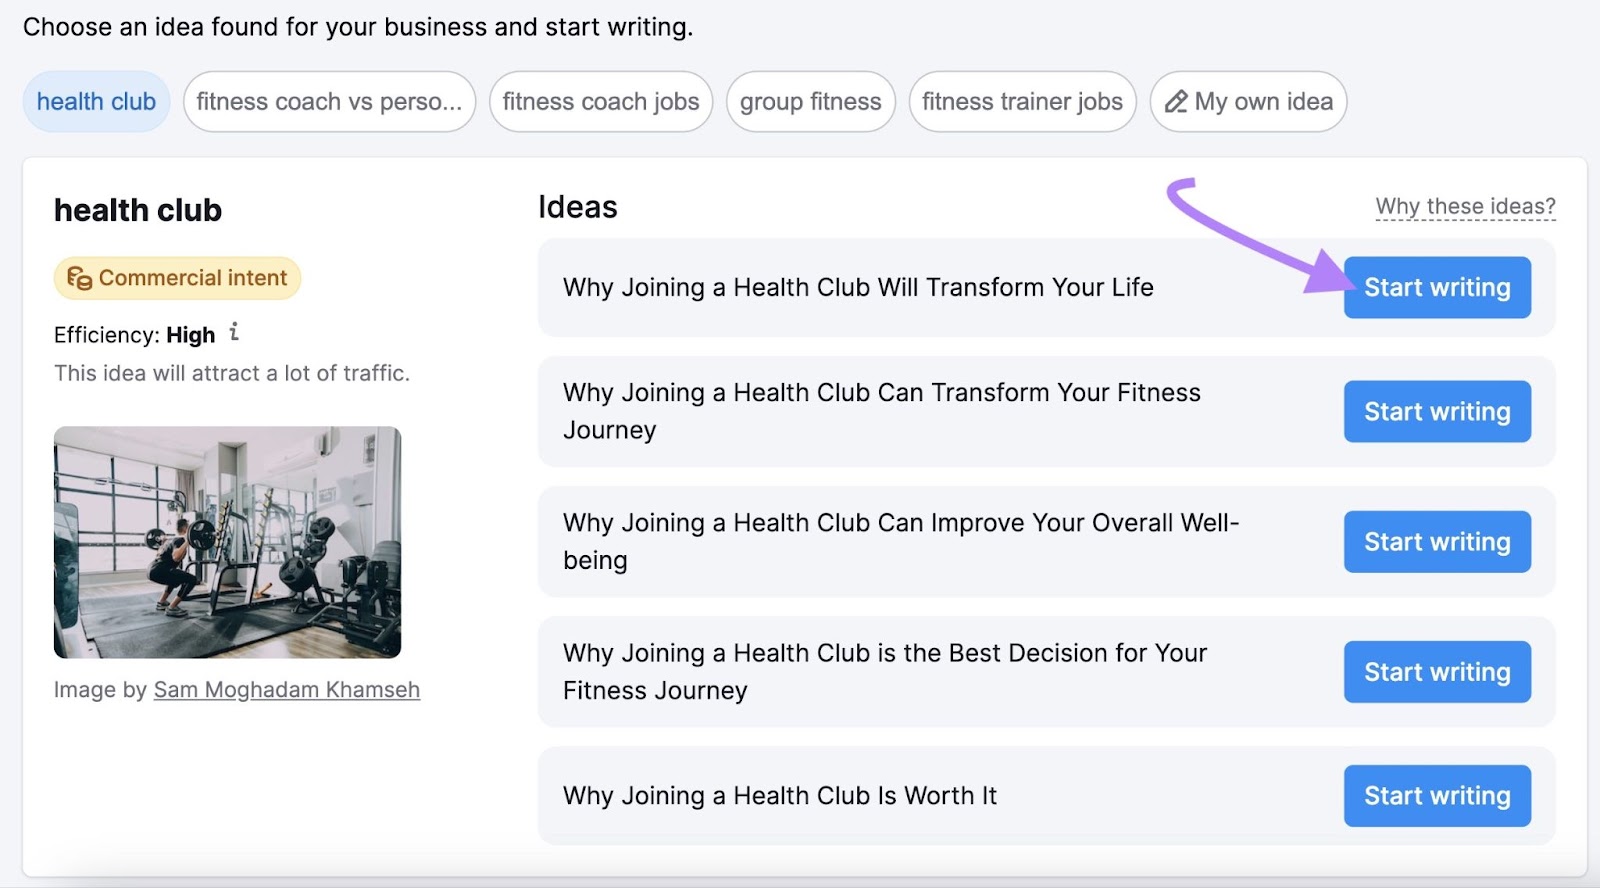 Ideas related to "health club" successful  ContentShake AI app